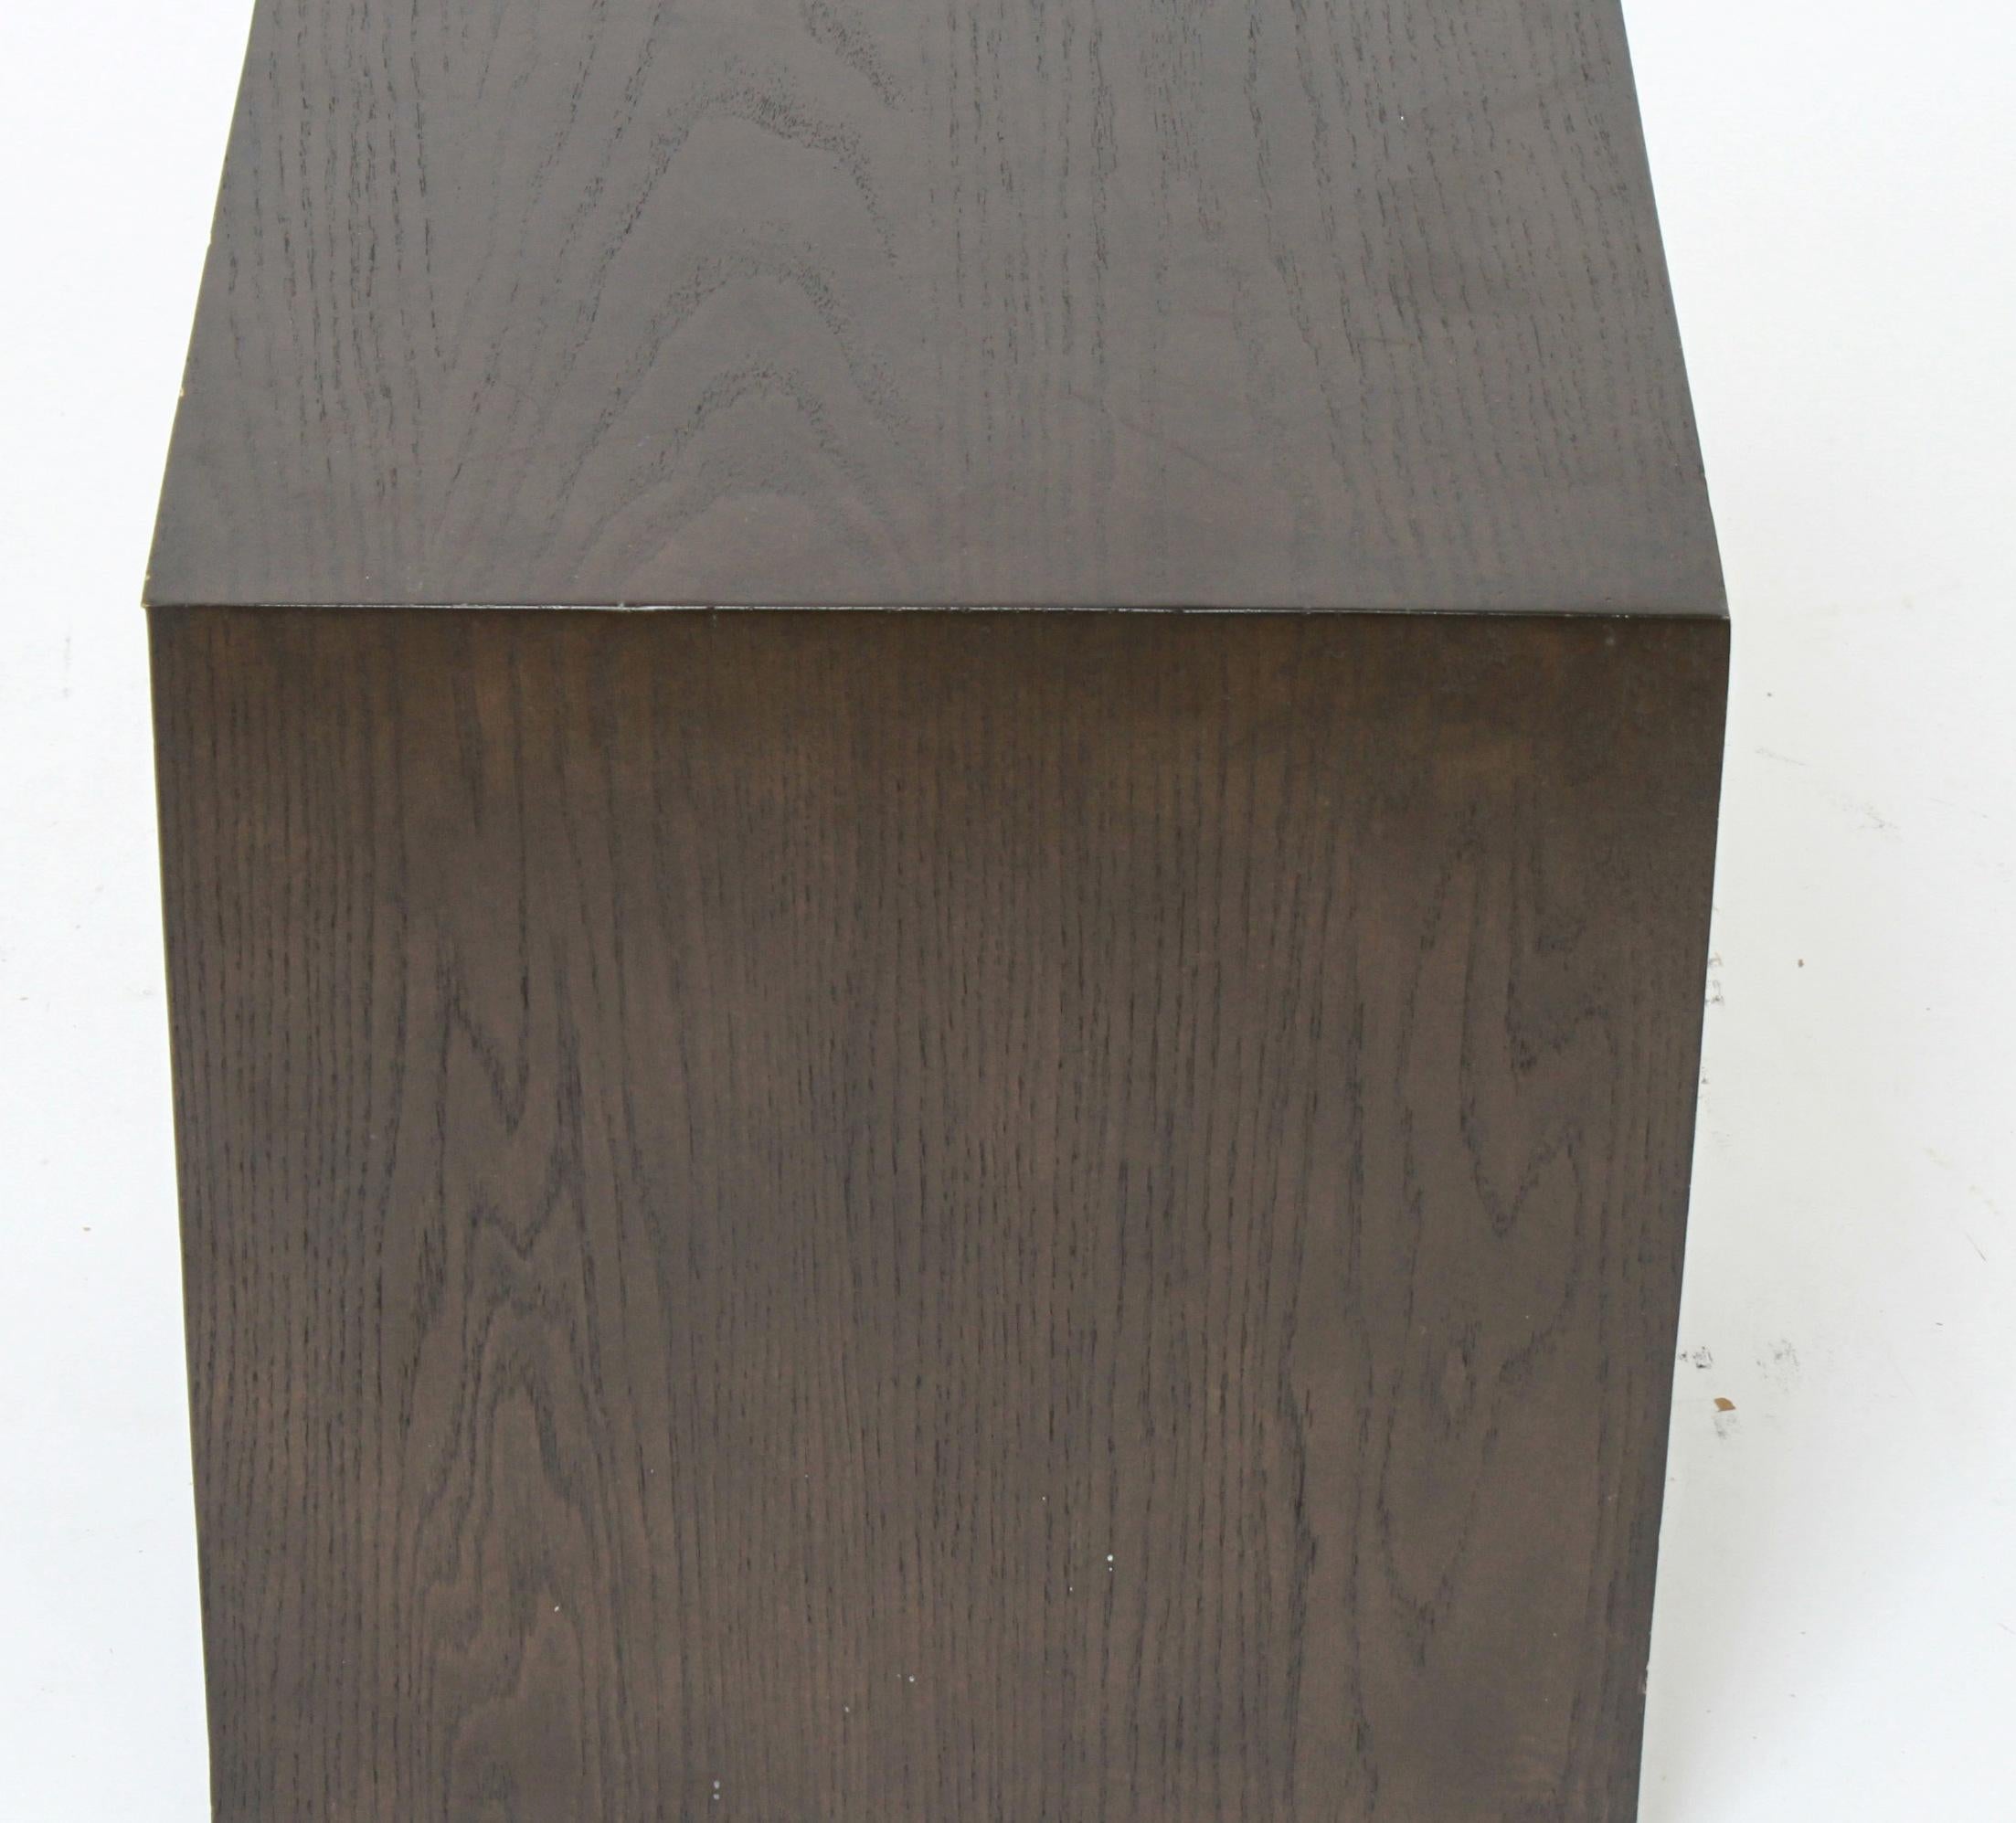 Modern wood side table with a square top. The piece is in great vintage condition with some age-appropriate wear and use.